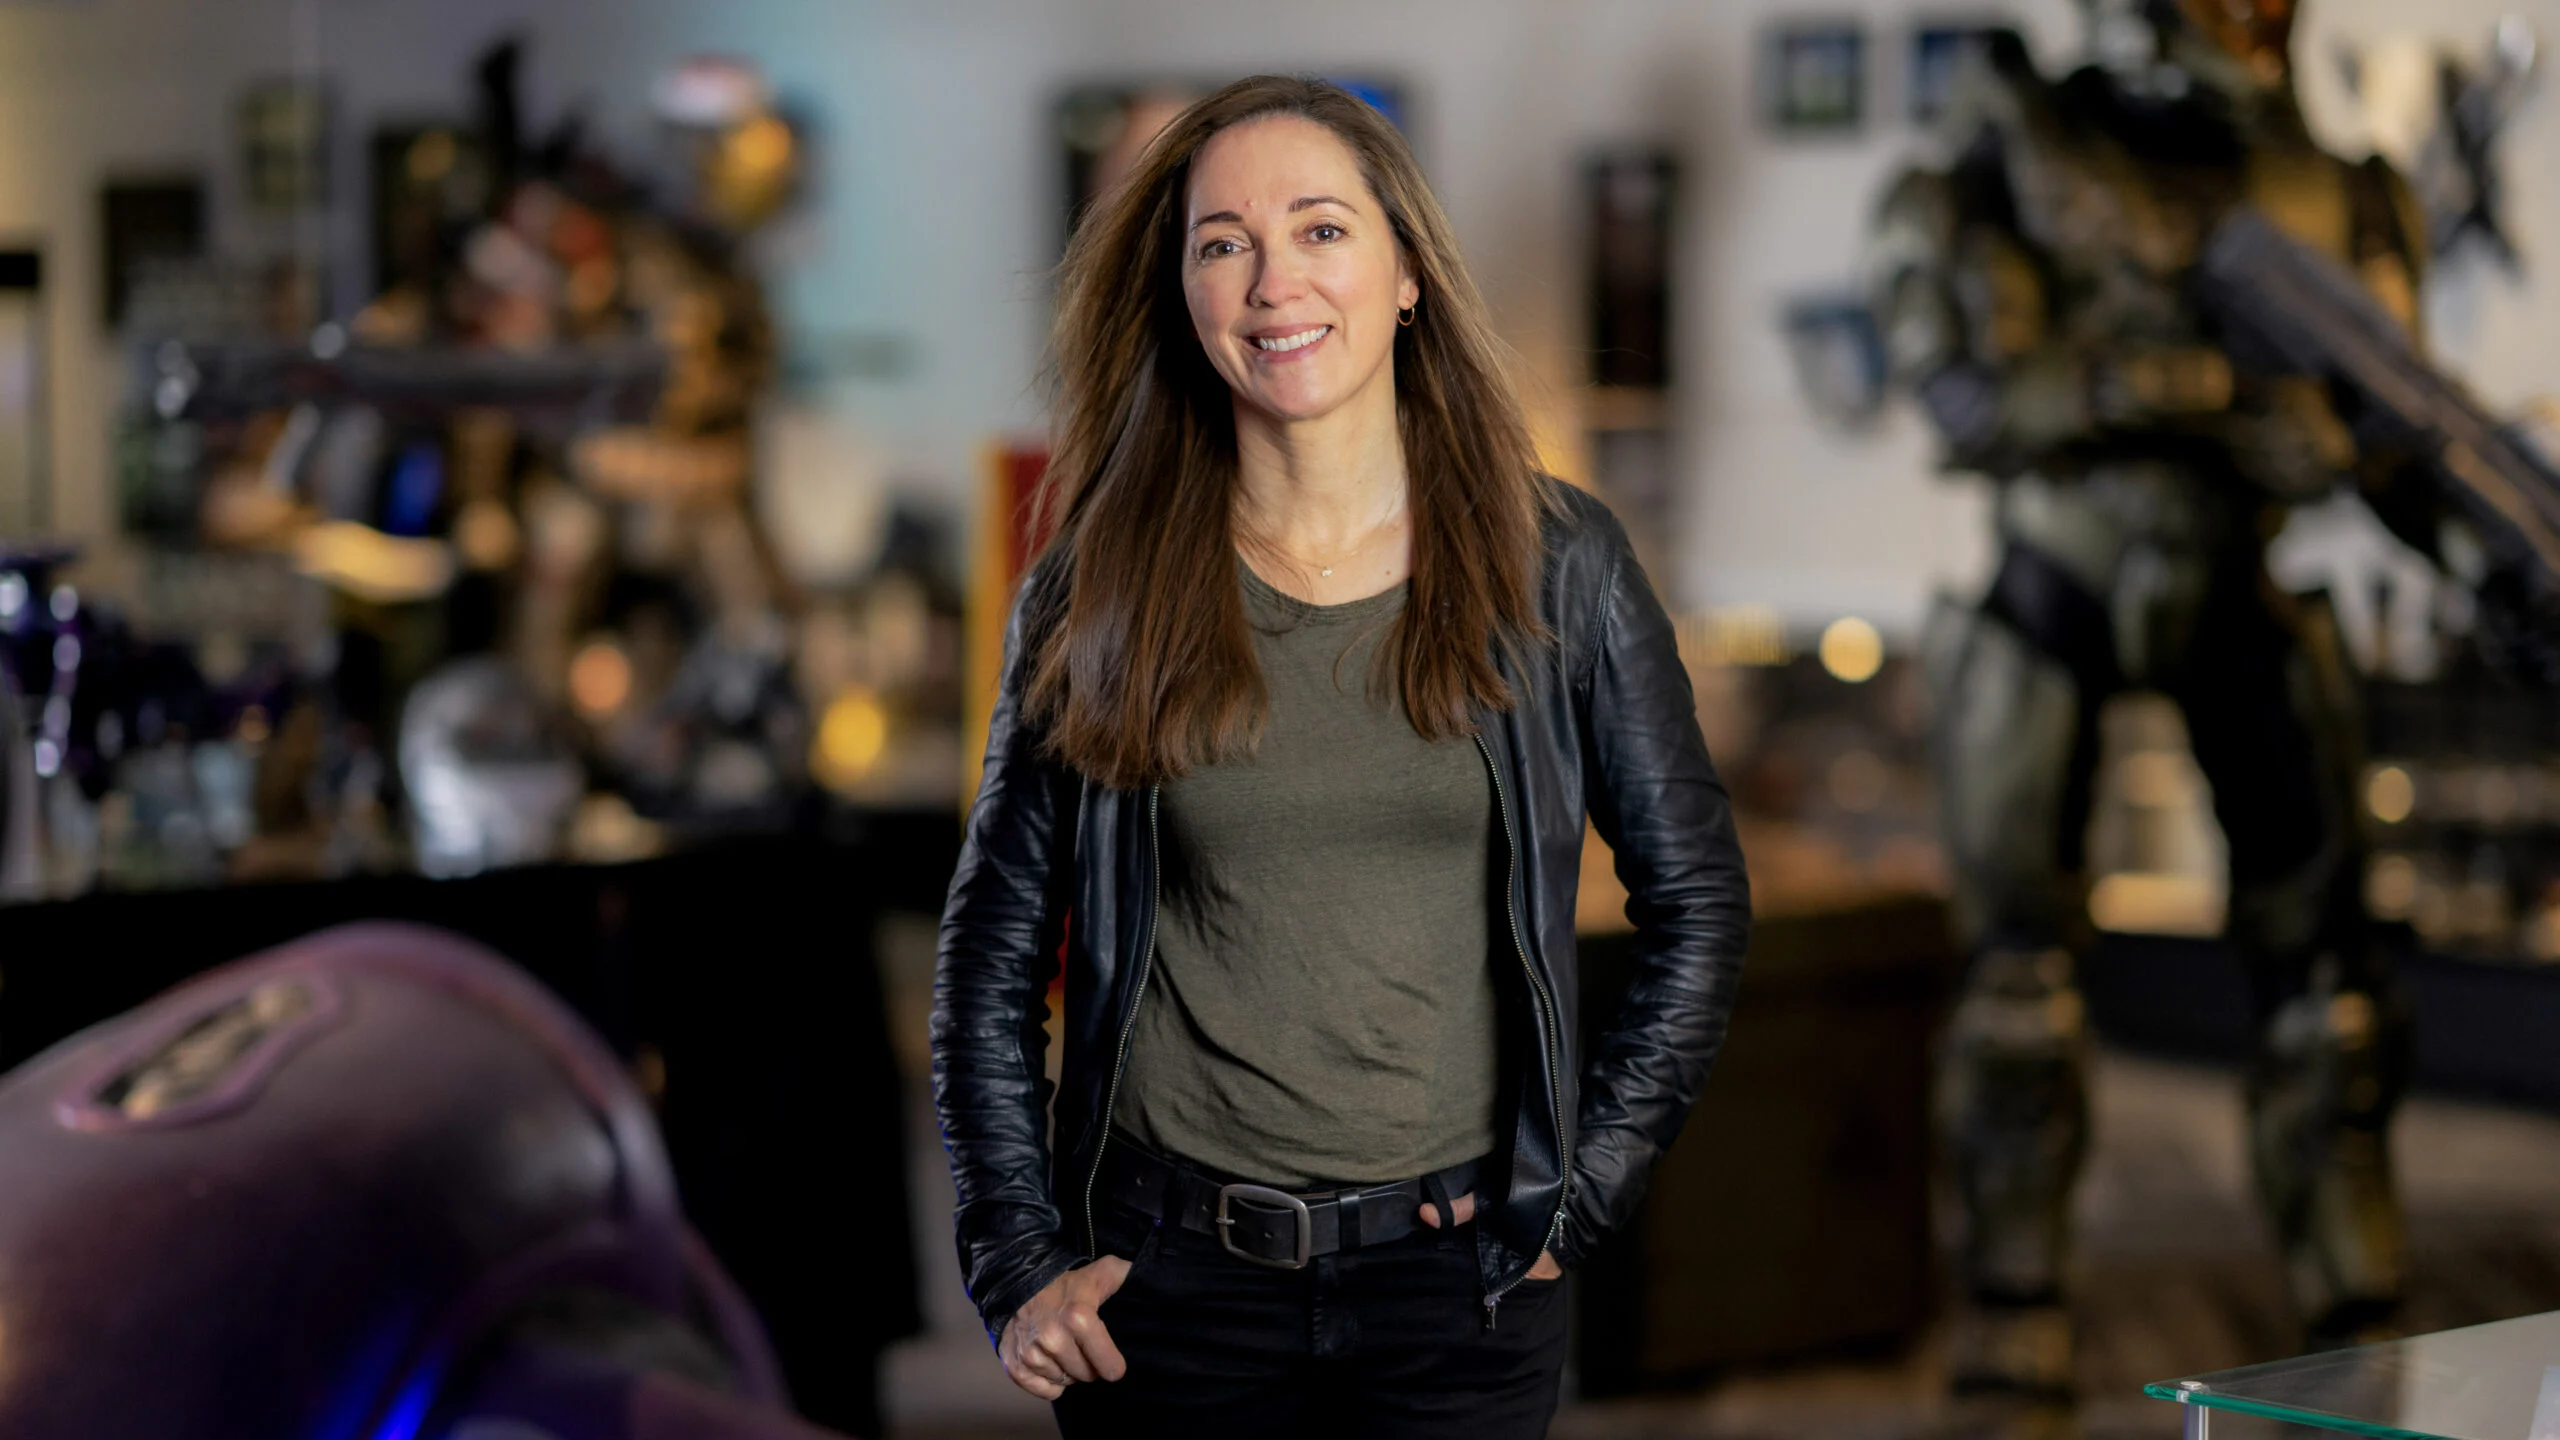 Bonnie Ross Leaves Halo Studio 343 Industries After 15 Years